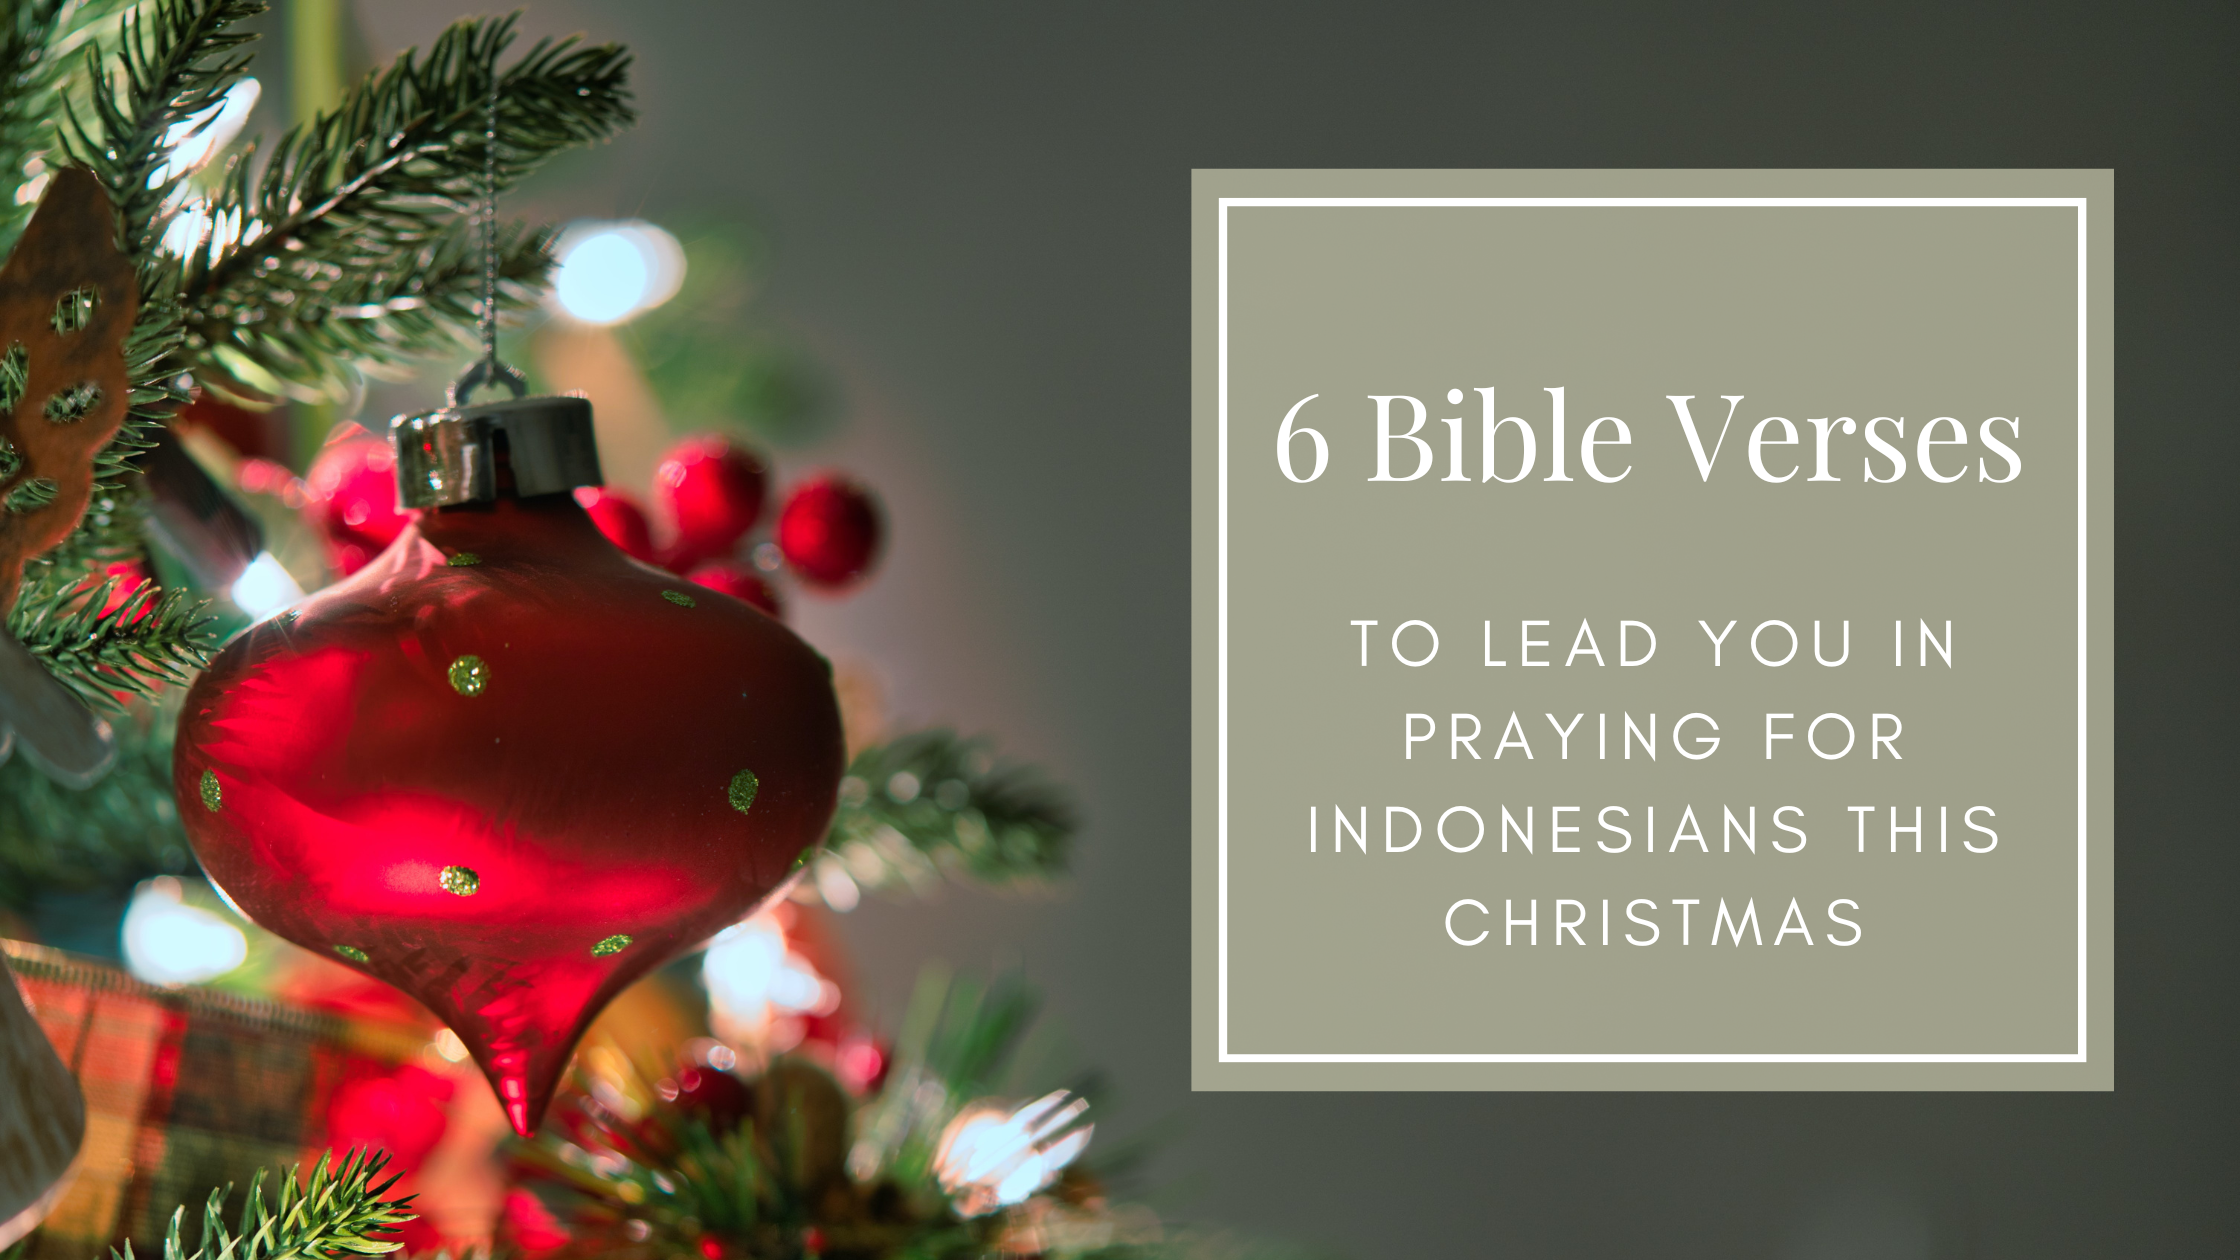 6 Bible Verses to Lead You in Praying for Indonesians this Christmas